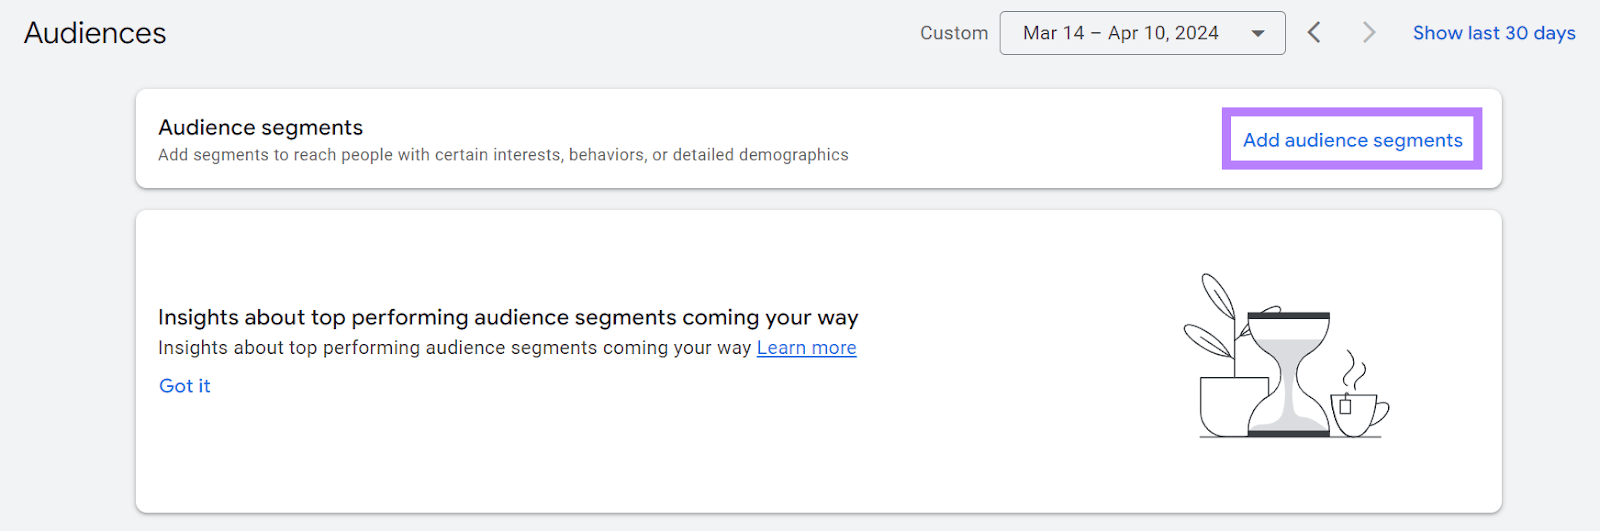 “Add audience segments" button highlighted